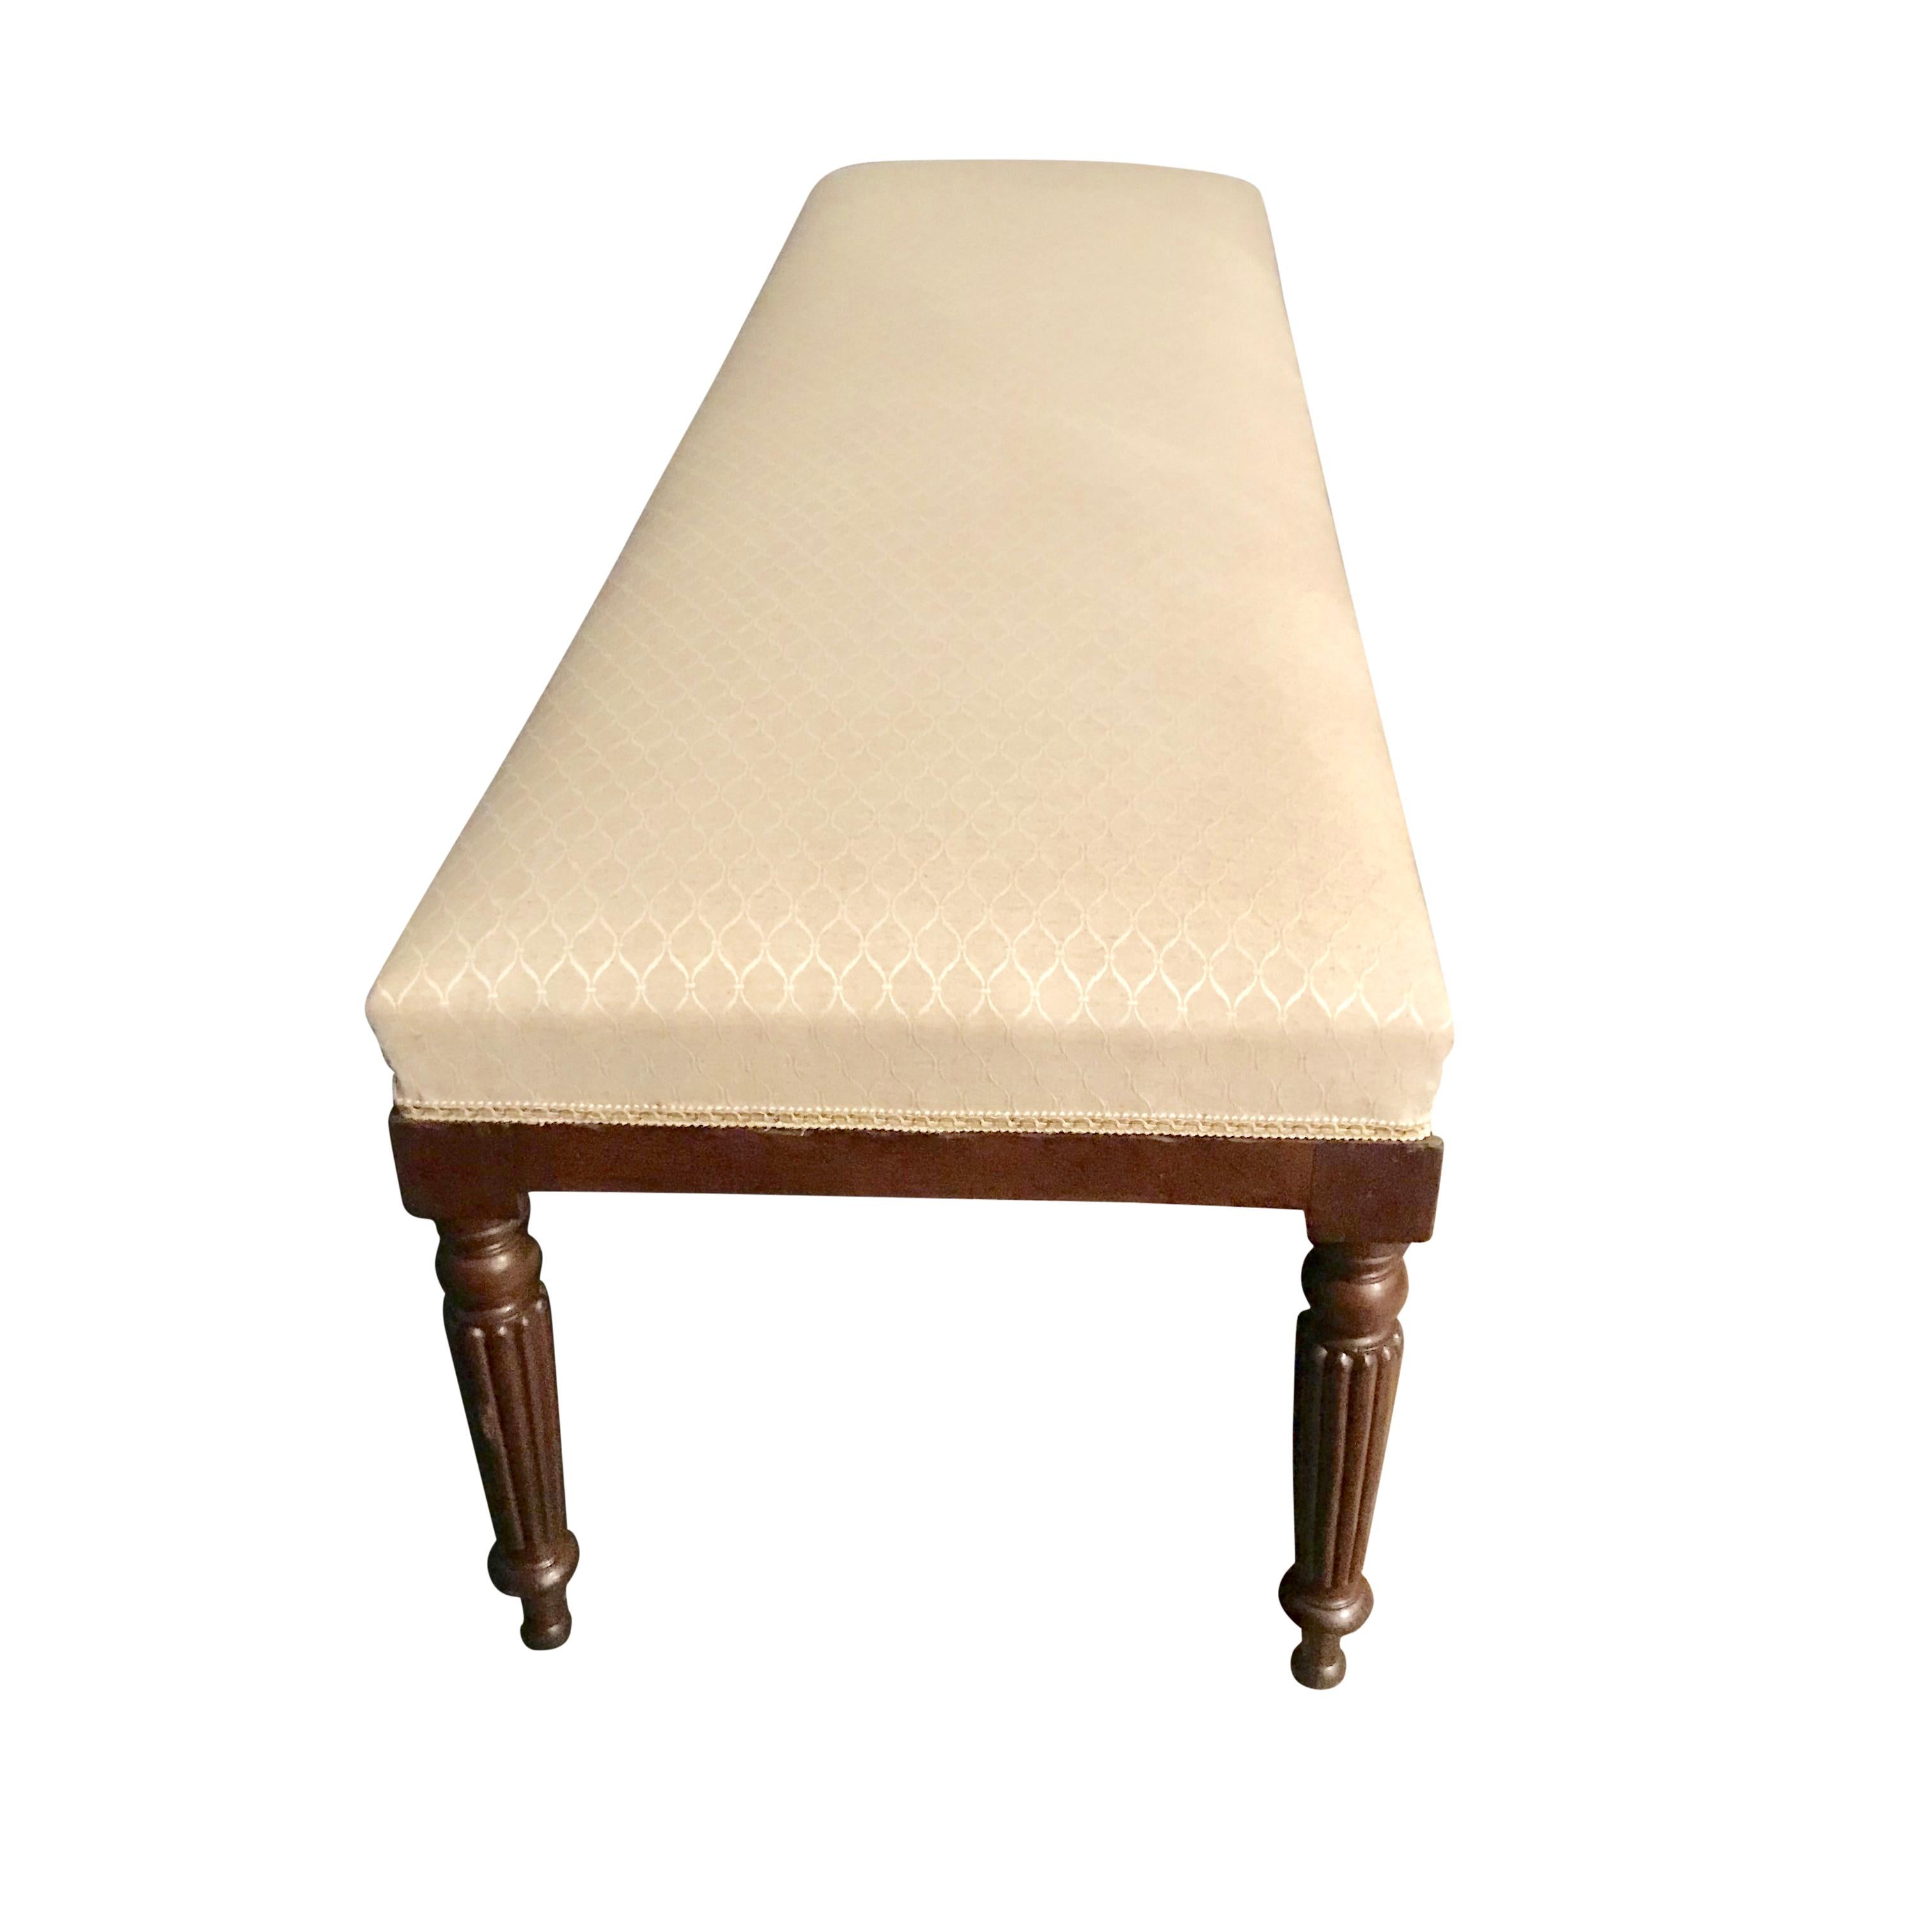 19th century Italian bench recently upholstered
Traditional turned walnut legs
Ideal for the end of a bed.